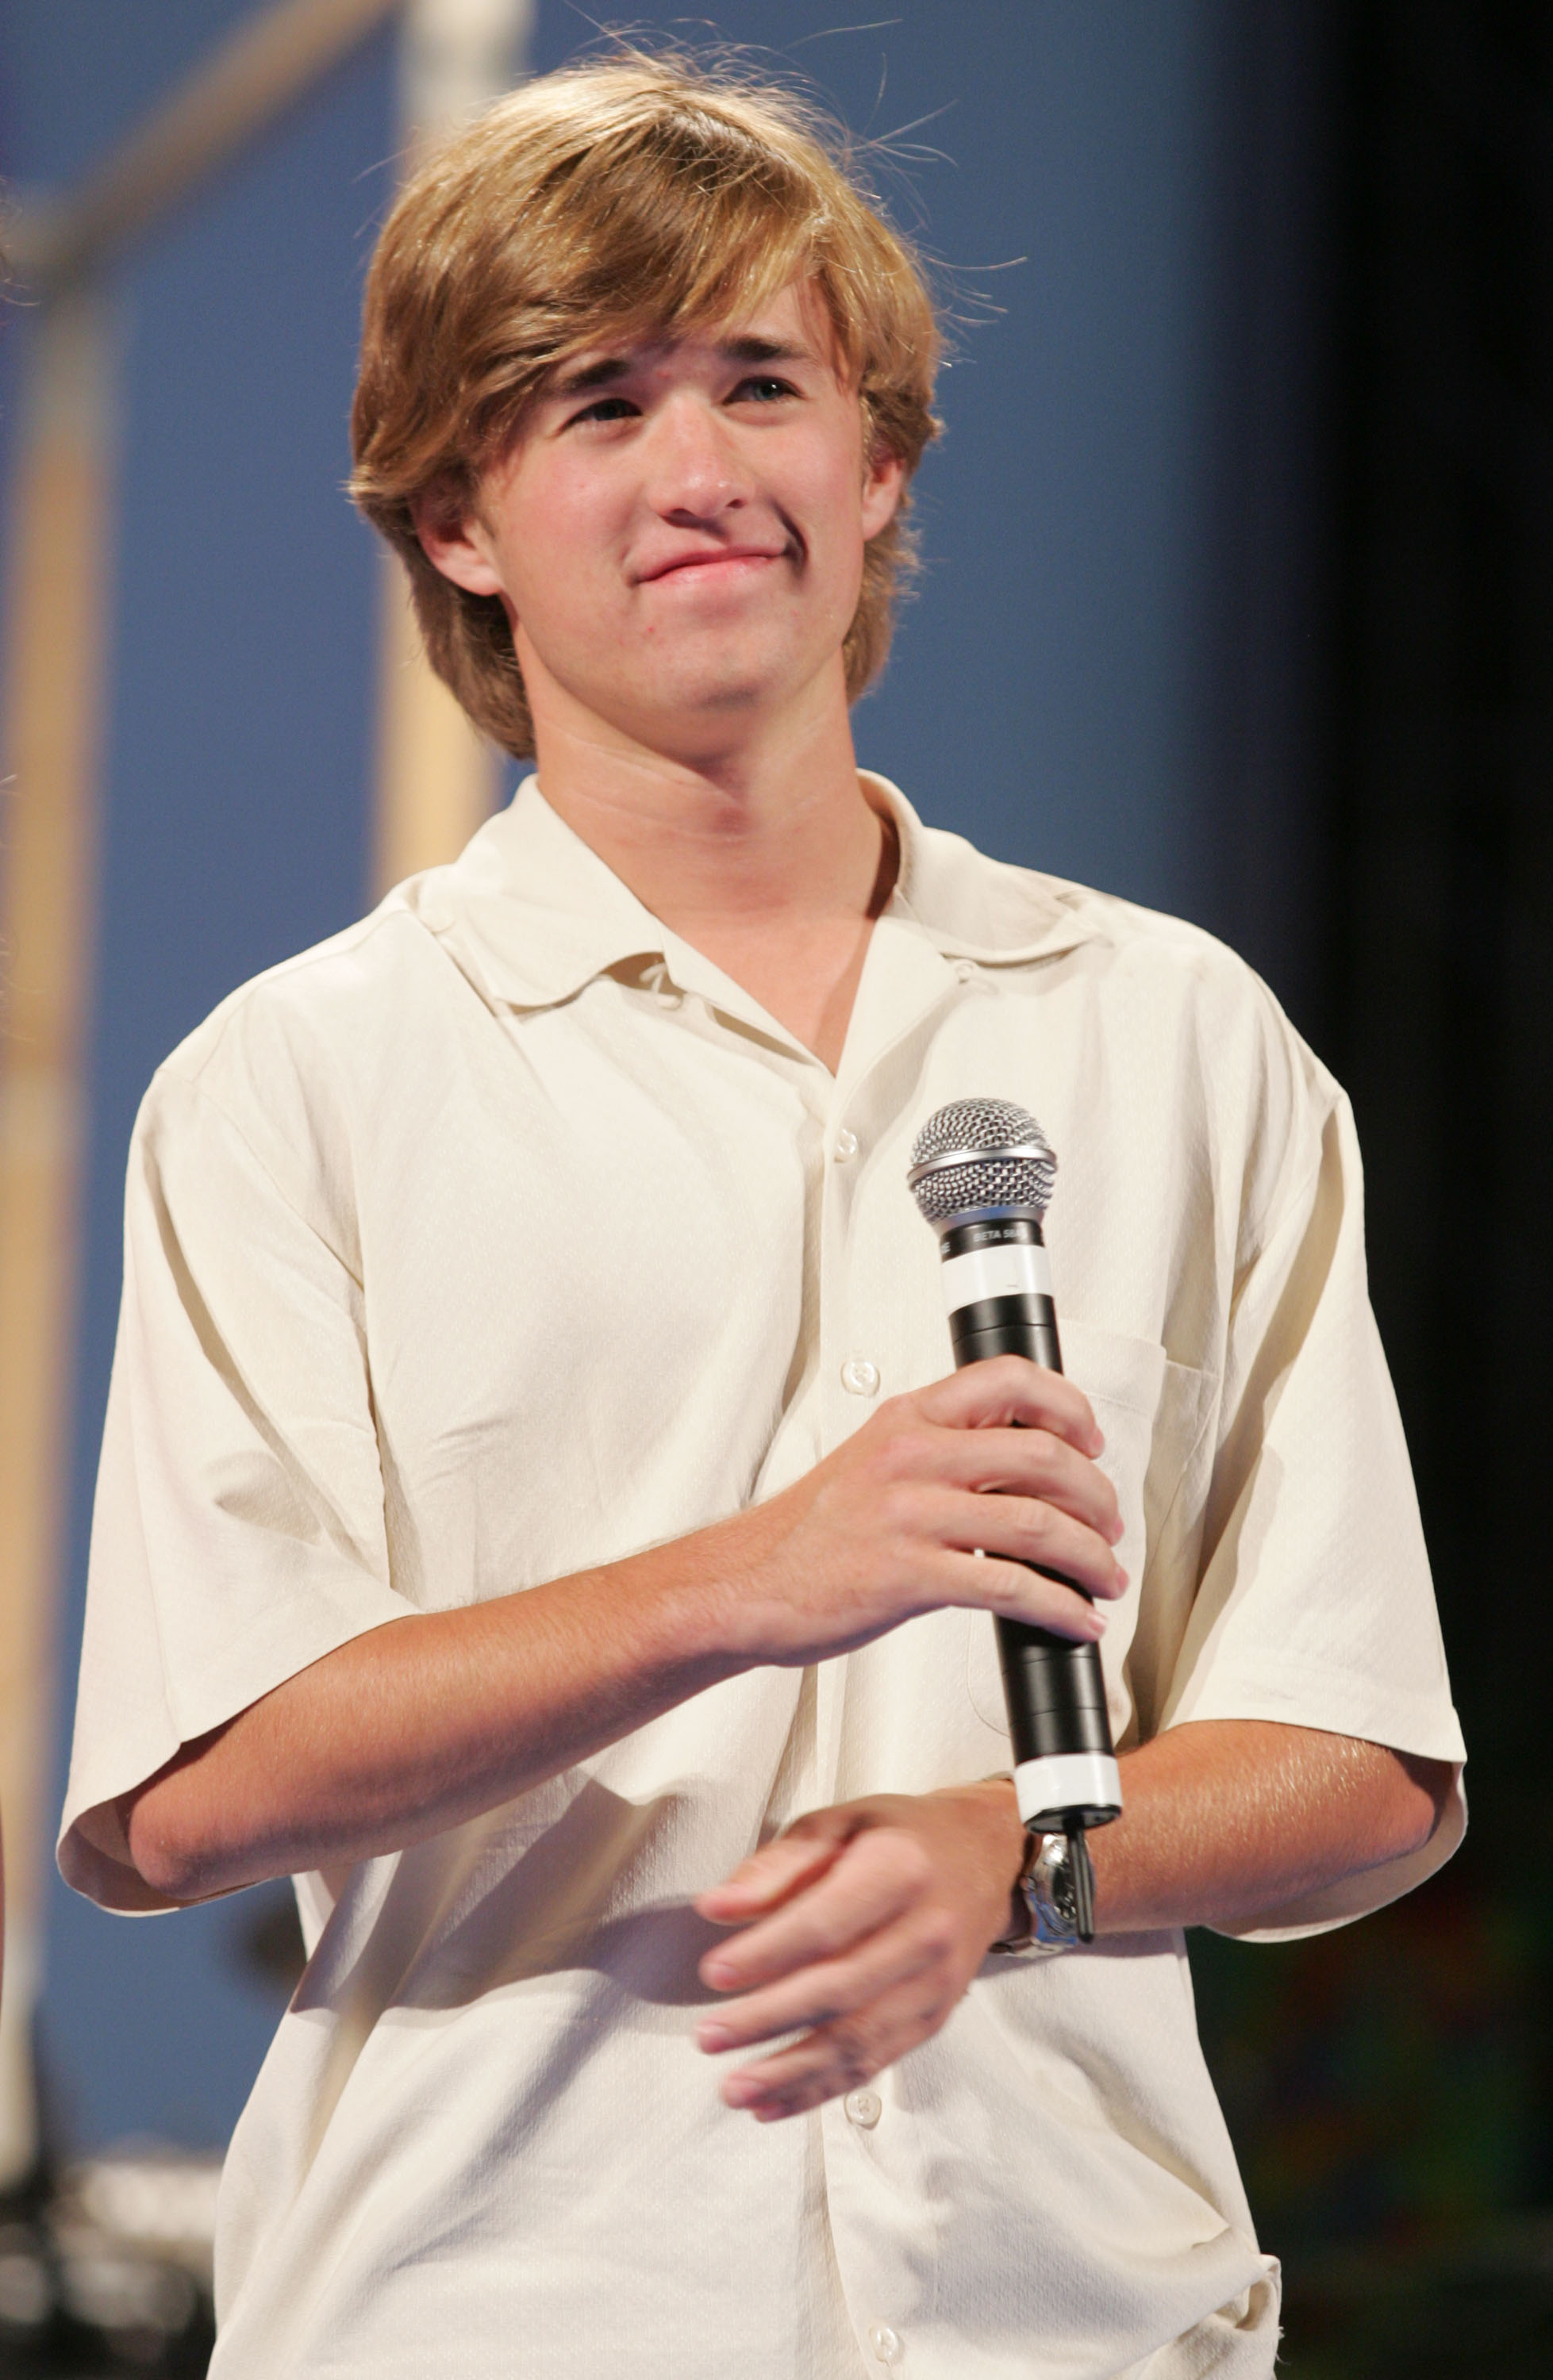 Haley Osment 2005 Festival international du film pour enfants de Giffoni - Haley Joel Osment Tribute at the Alberto Forbi Arena on July 17, 2005 in Giffoni, Italy. | Source : Getty Images